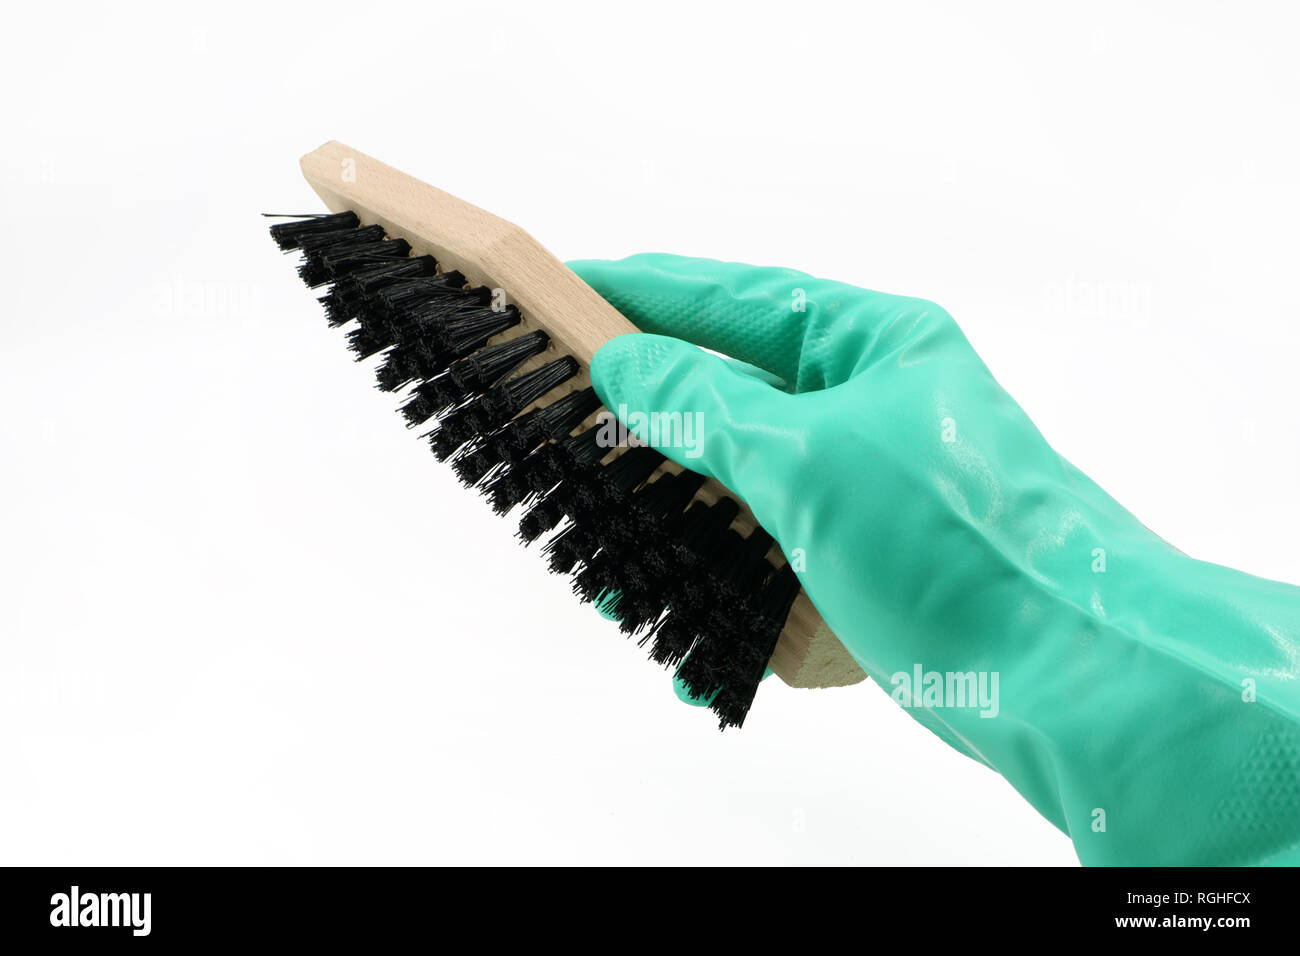 hand with glove is holding a shoe brush isolated on white background Stock Photo